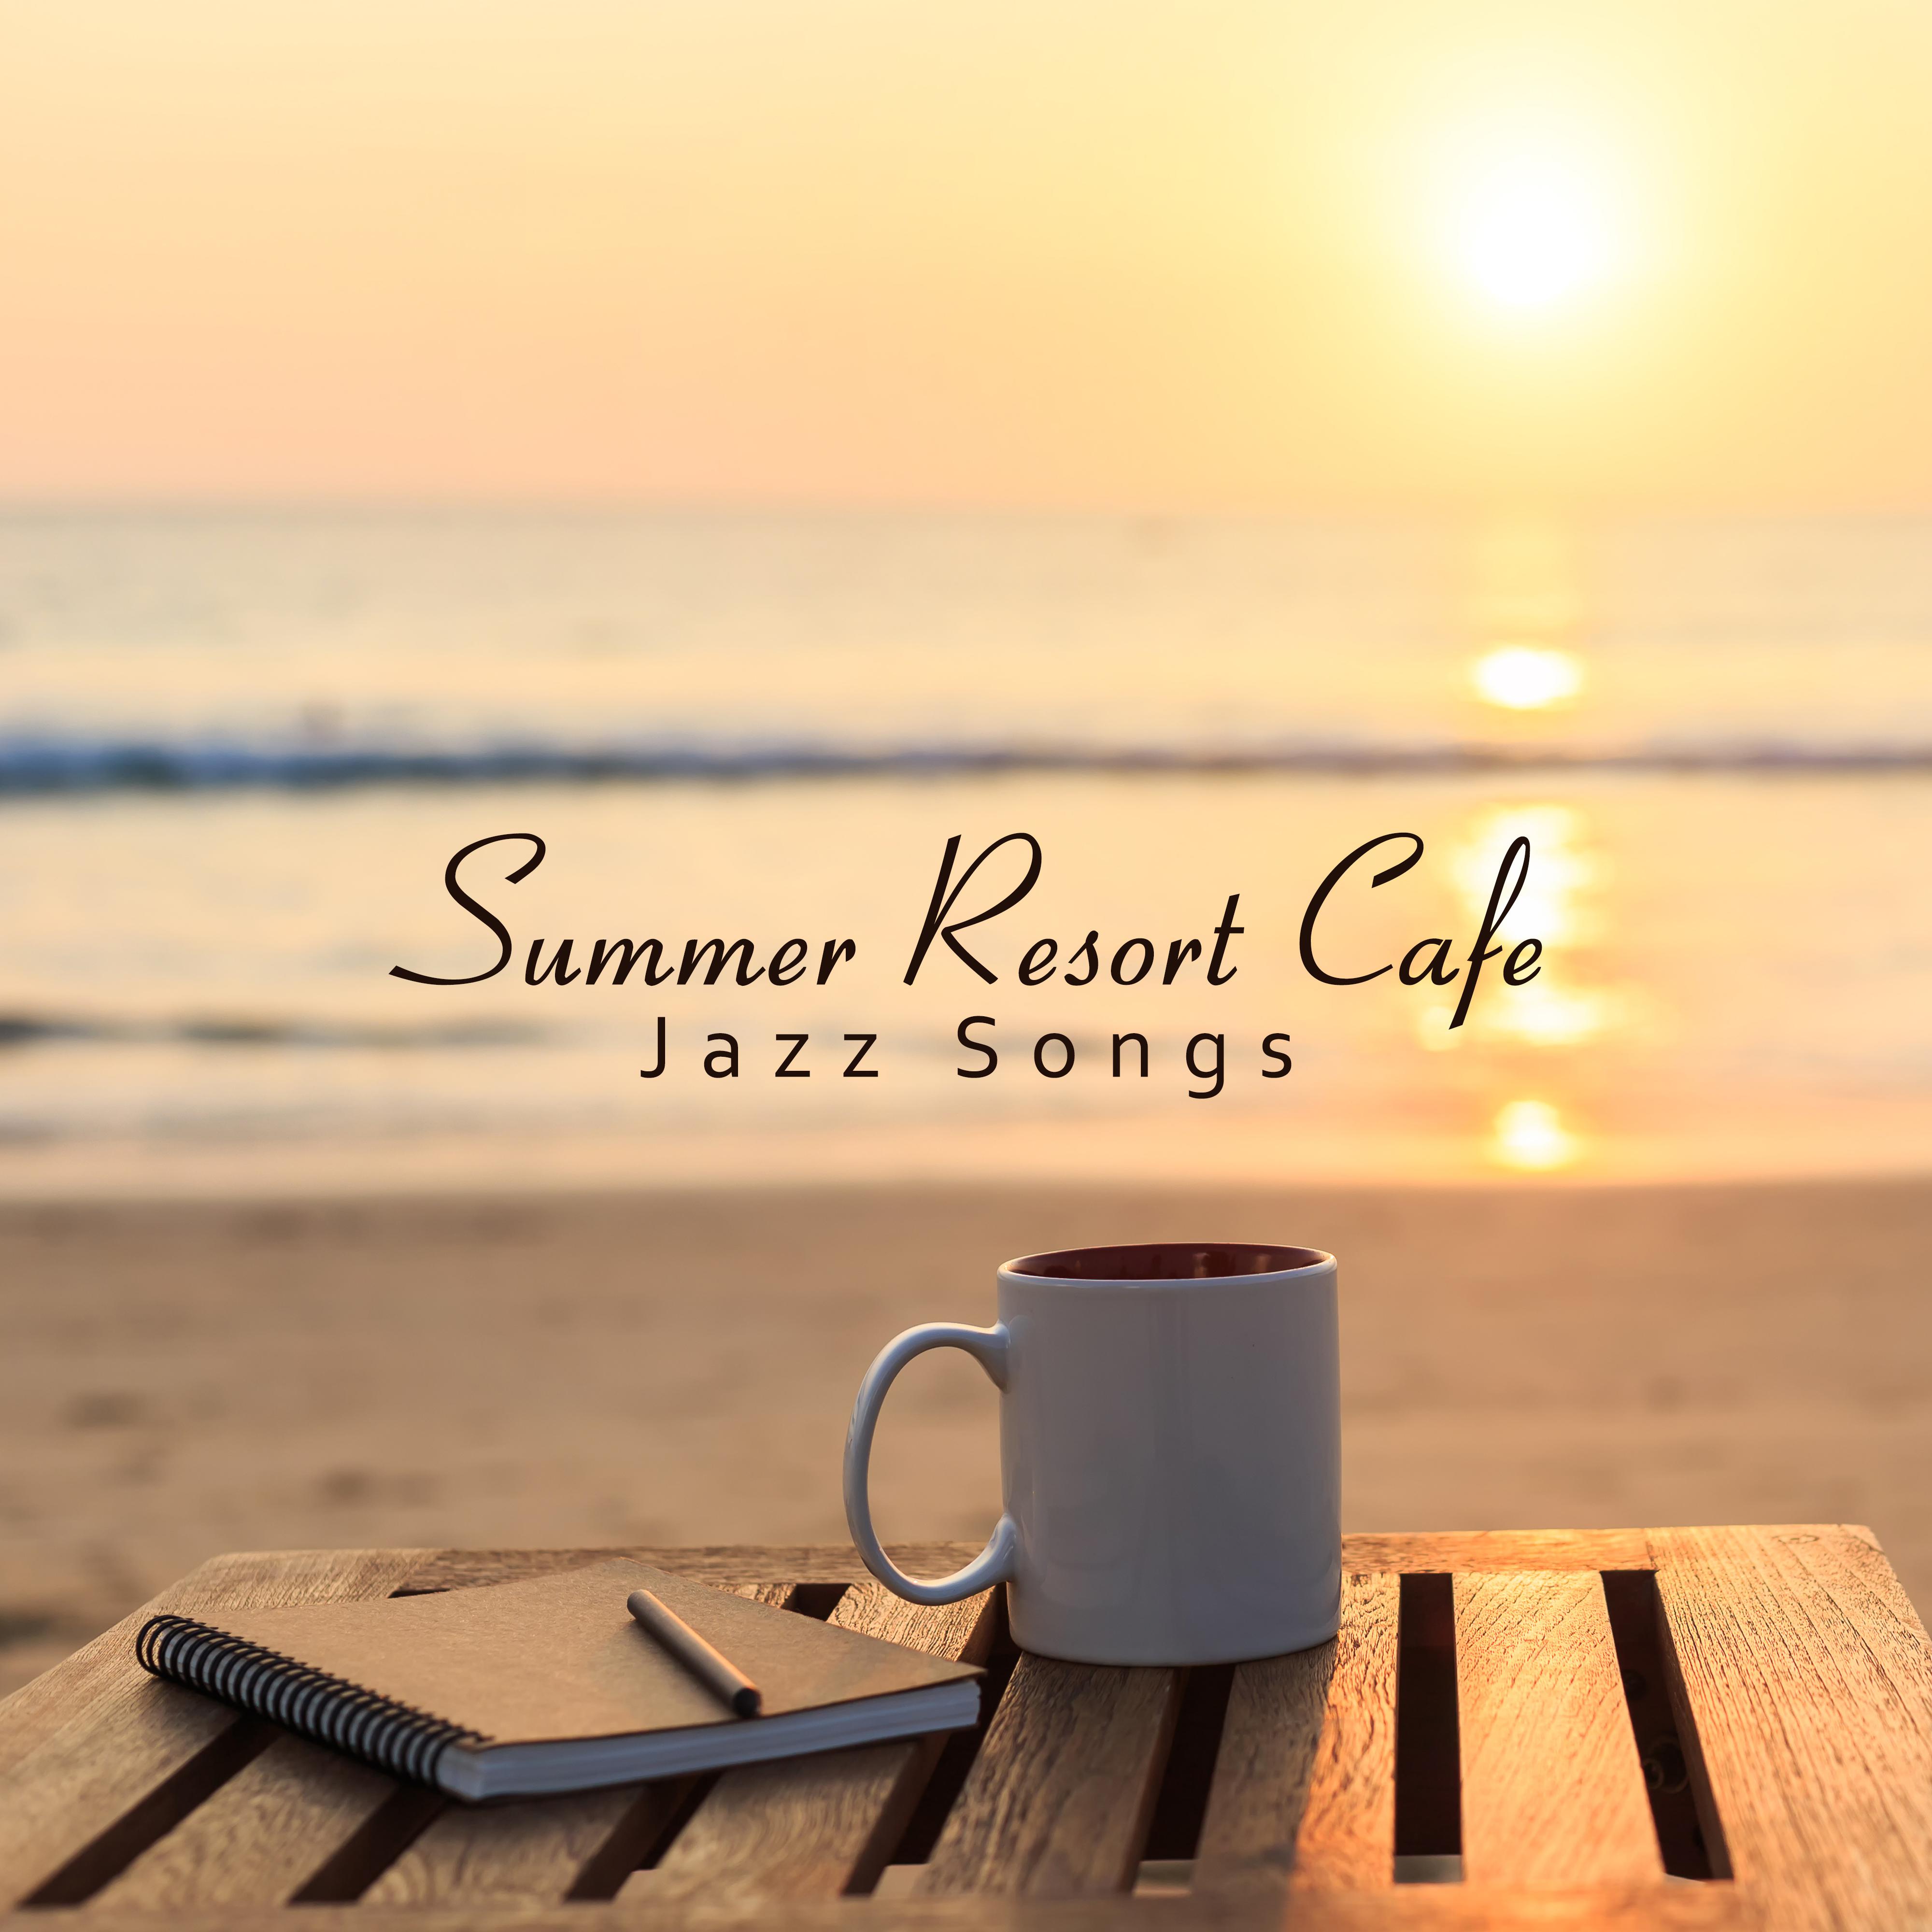 Summer Resort Cafe Jazz Songs: 15 Happy Instrumental Jazz Background 2019 Songs for Perfect Relax with Coffee and Dessert in a Beach Cafe